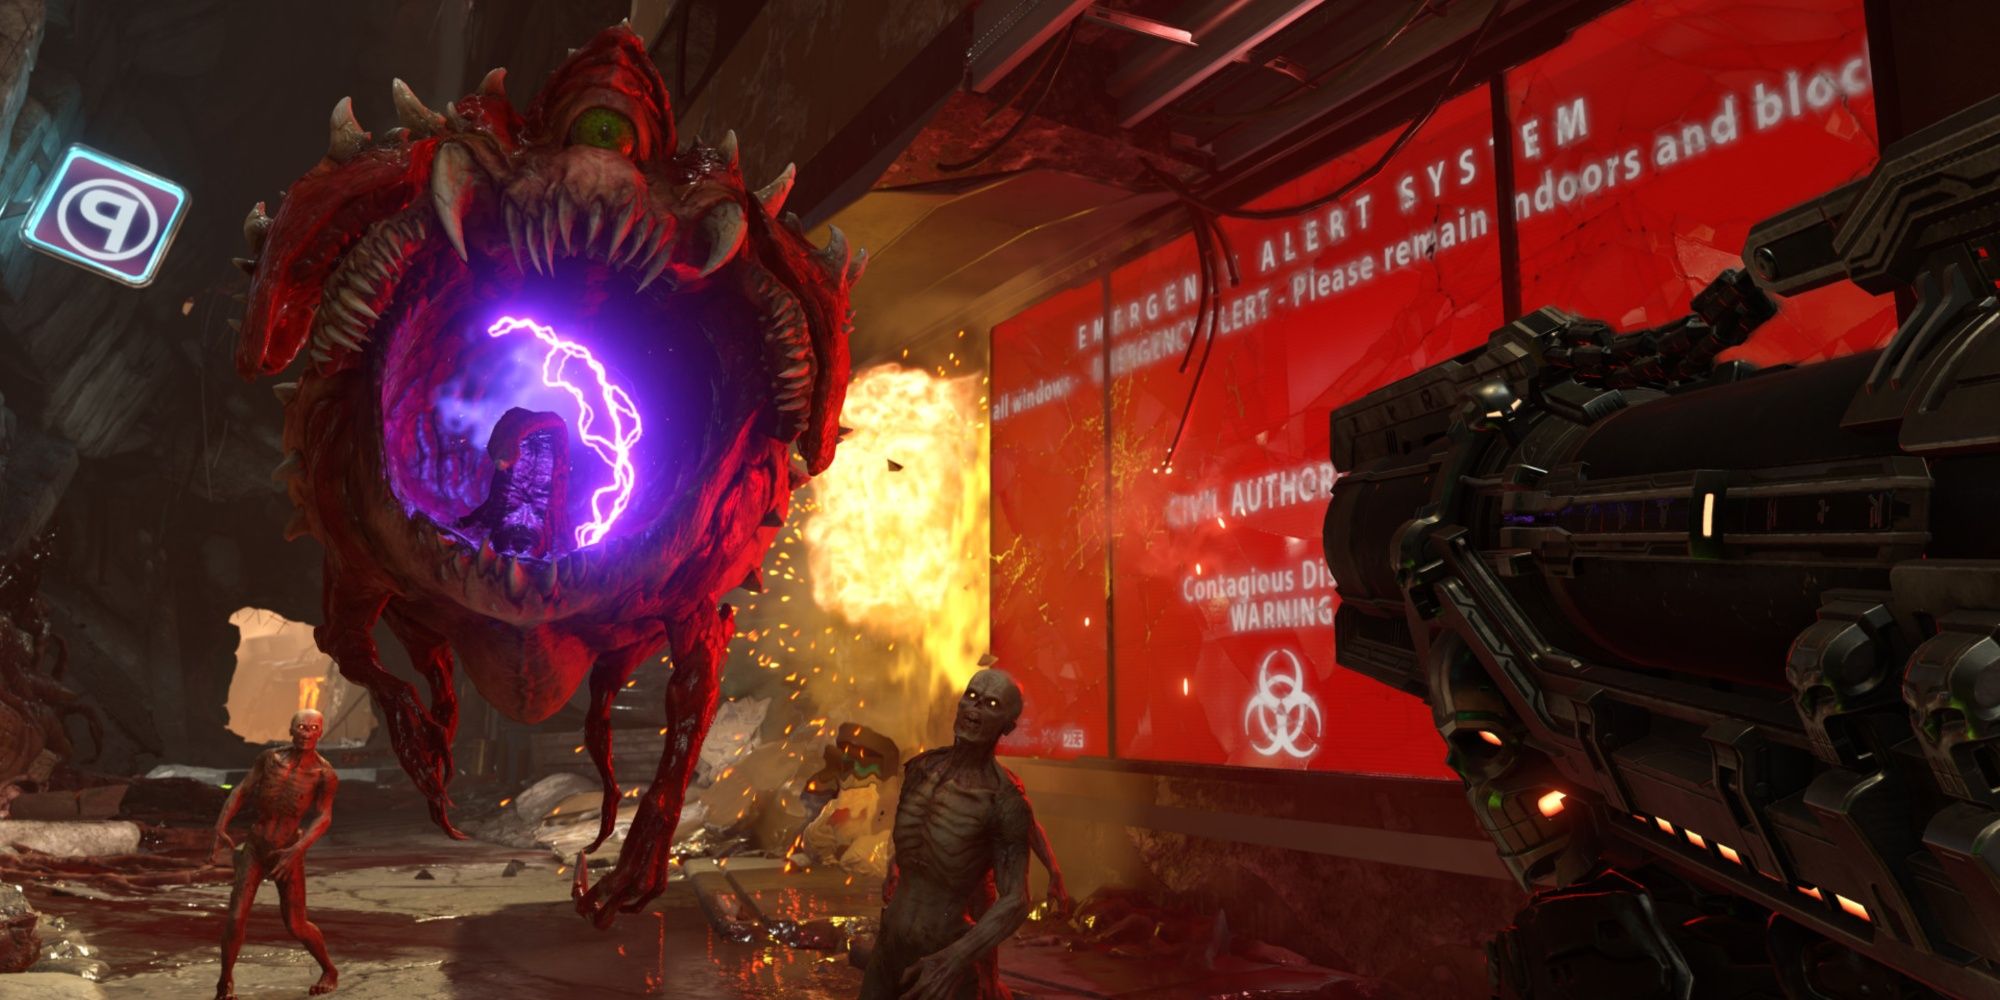 DOOM Eternal aiming large blaster at undead and electrified portal